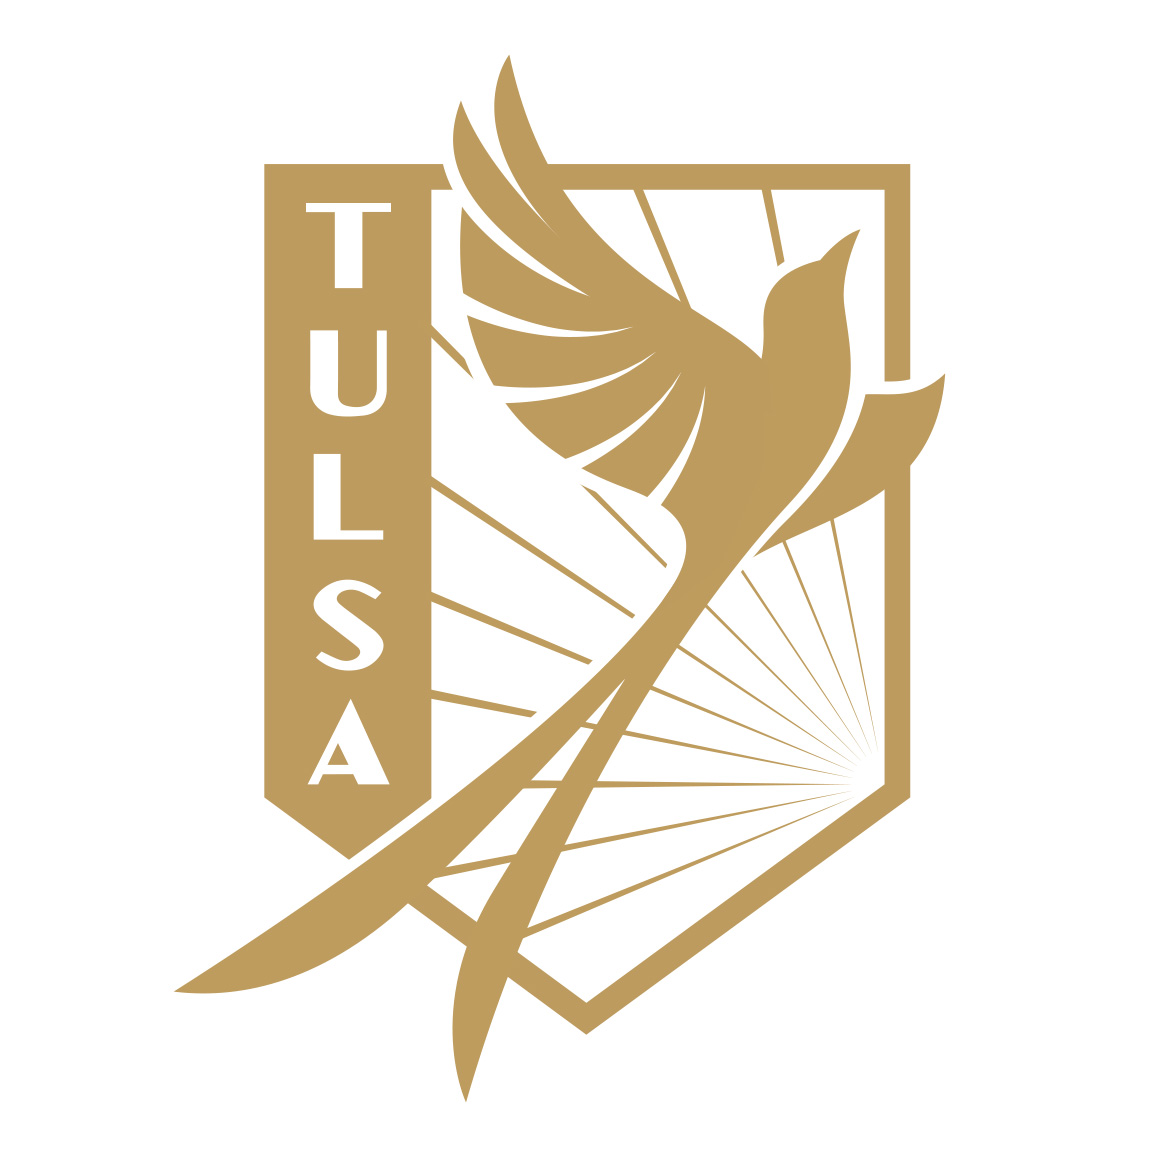 FC Tulsa logo design by logo designer Joshua Berman Design for your inspiration and for the worlds largest logo competition